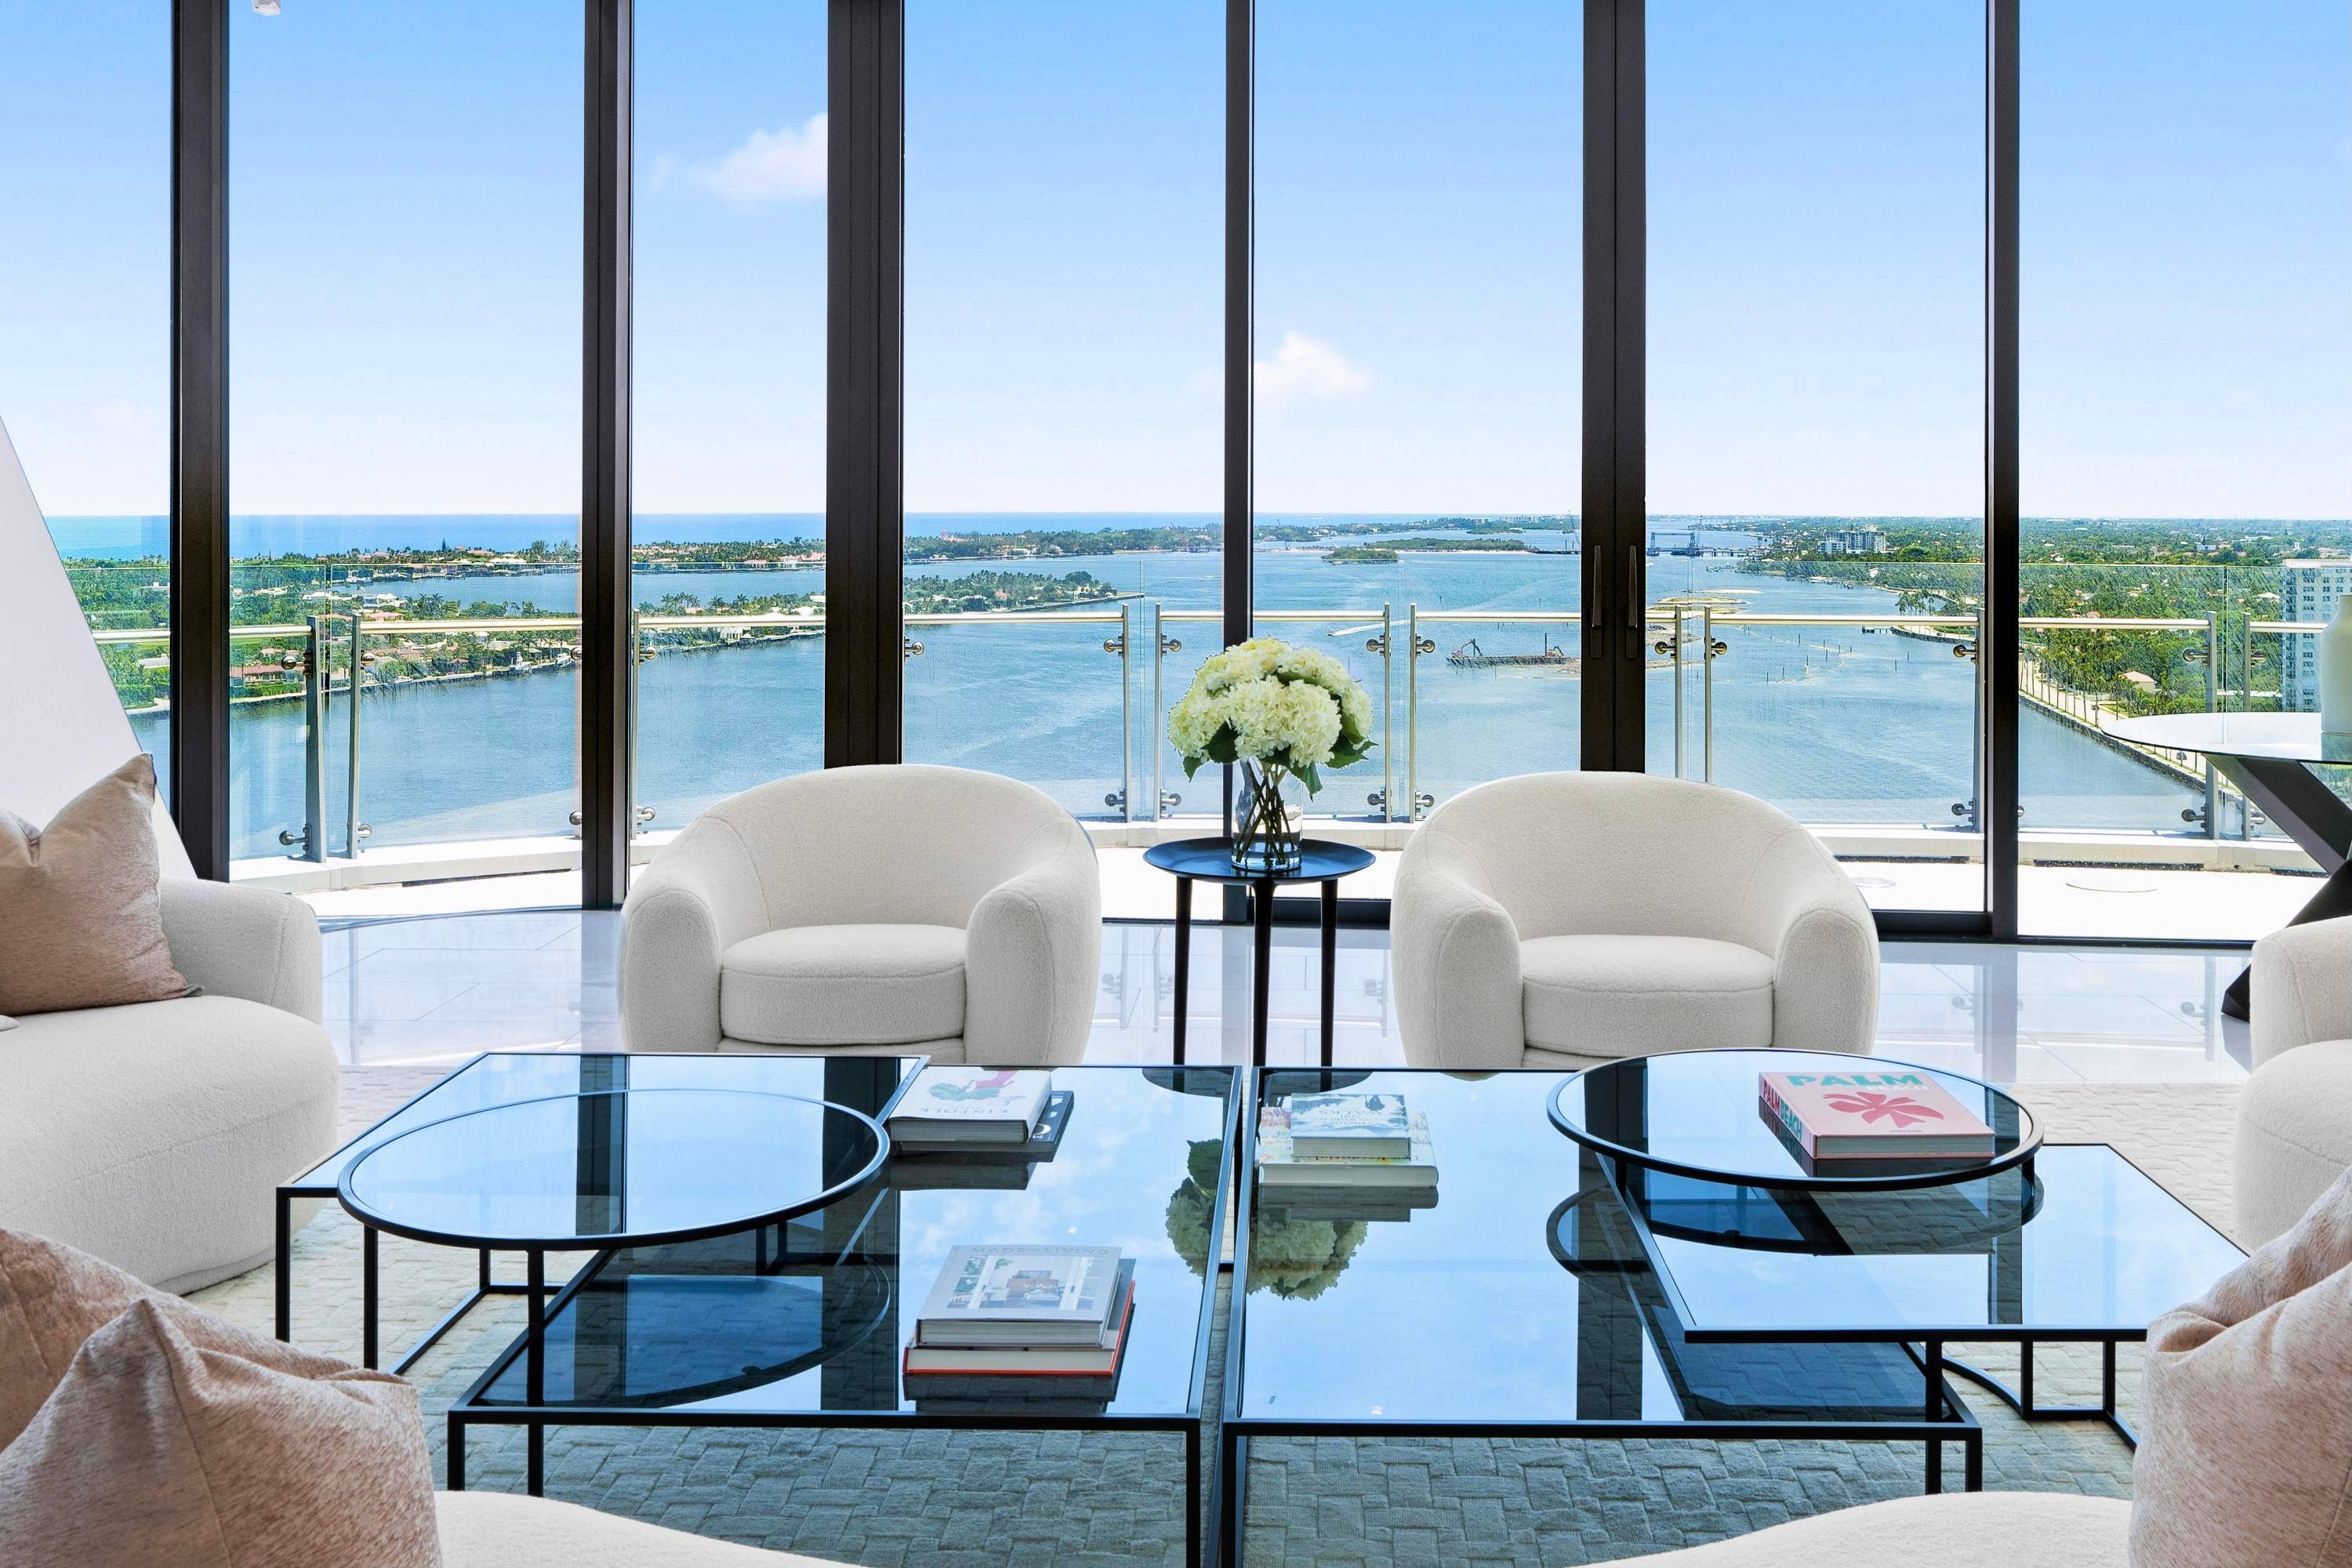 Unquestionably the most magnificent impressive panoramic views are seen as soon as you step inside this one of a kind, ultra luxury SE corner residence at The Bristol.